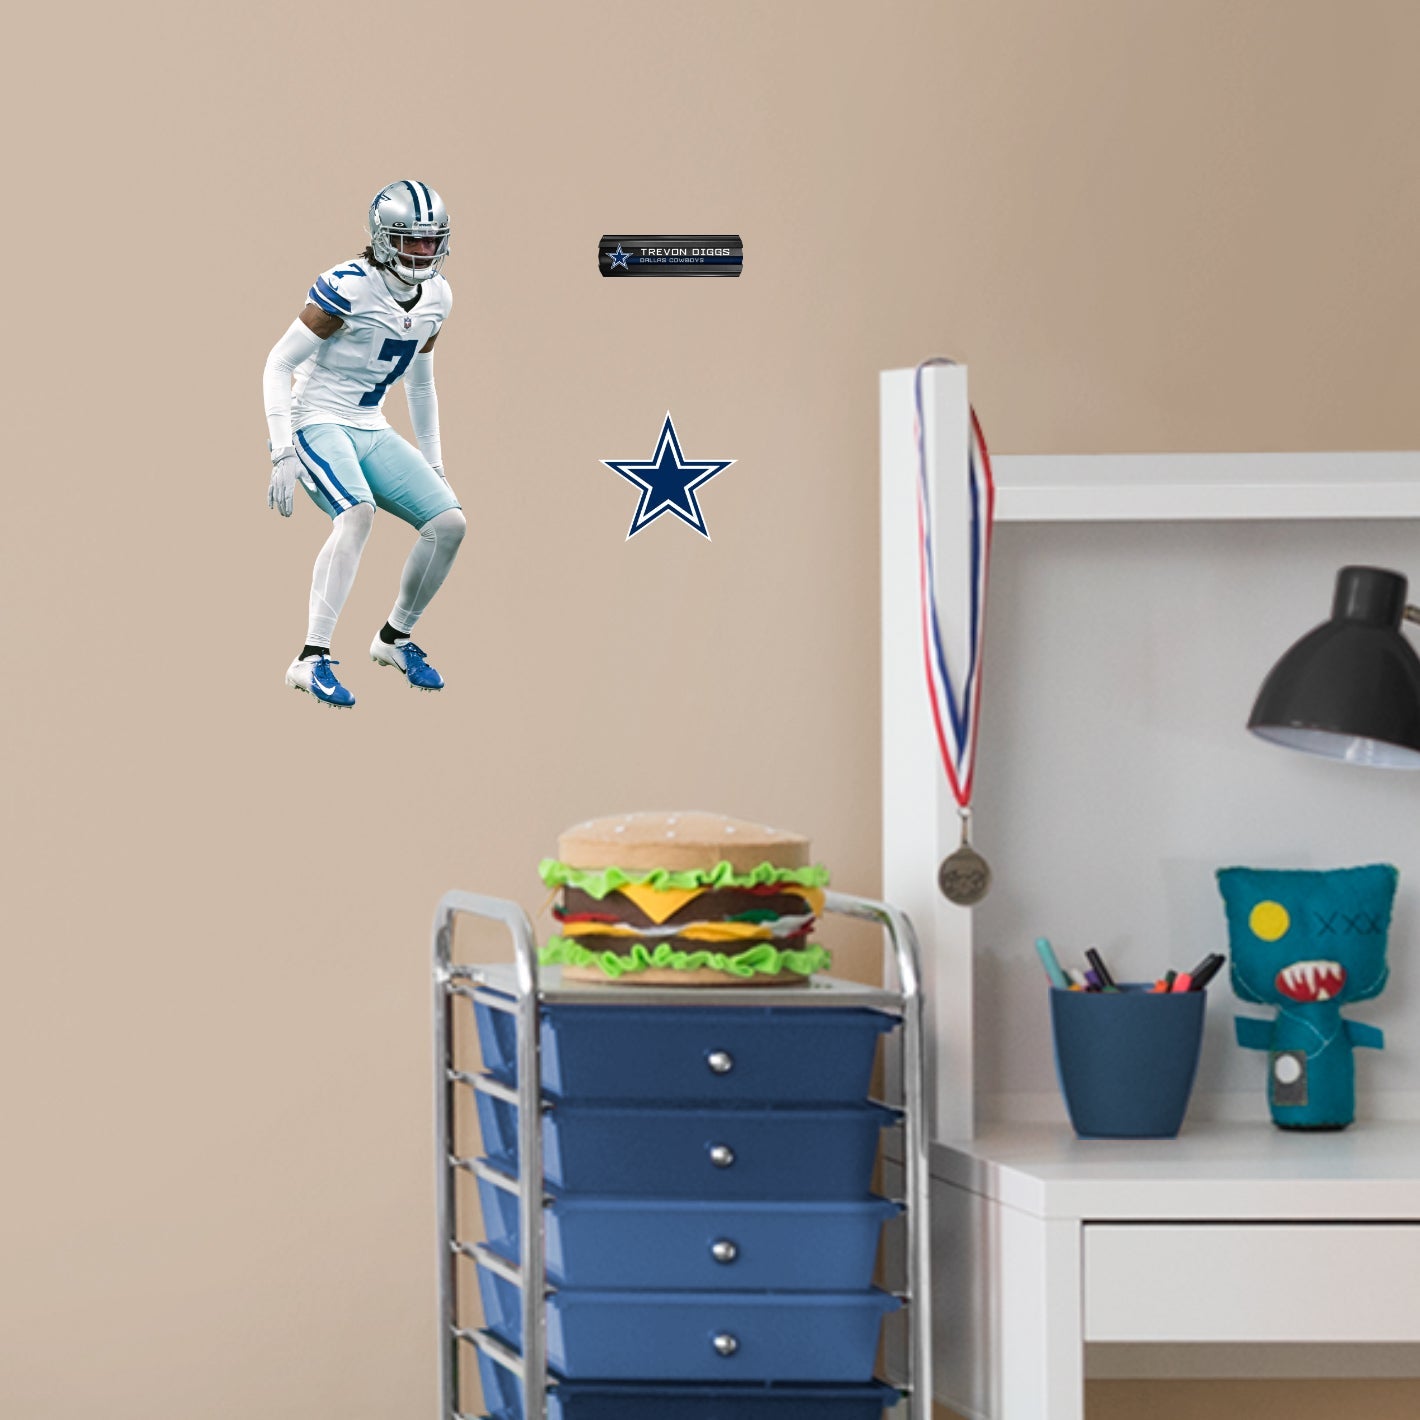 Dallas Cowboys: Trevon Diggs - Officially Licensed NFL Removable Adhesive Decal